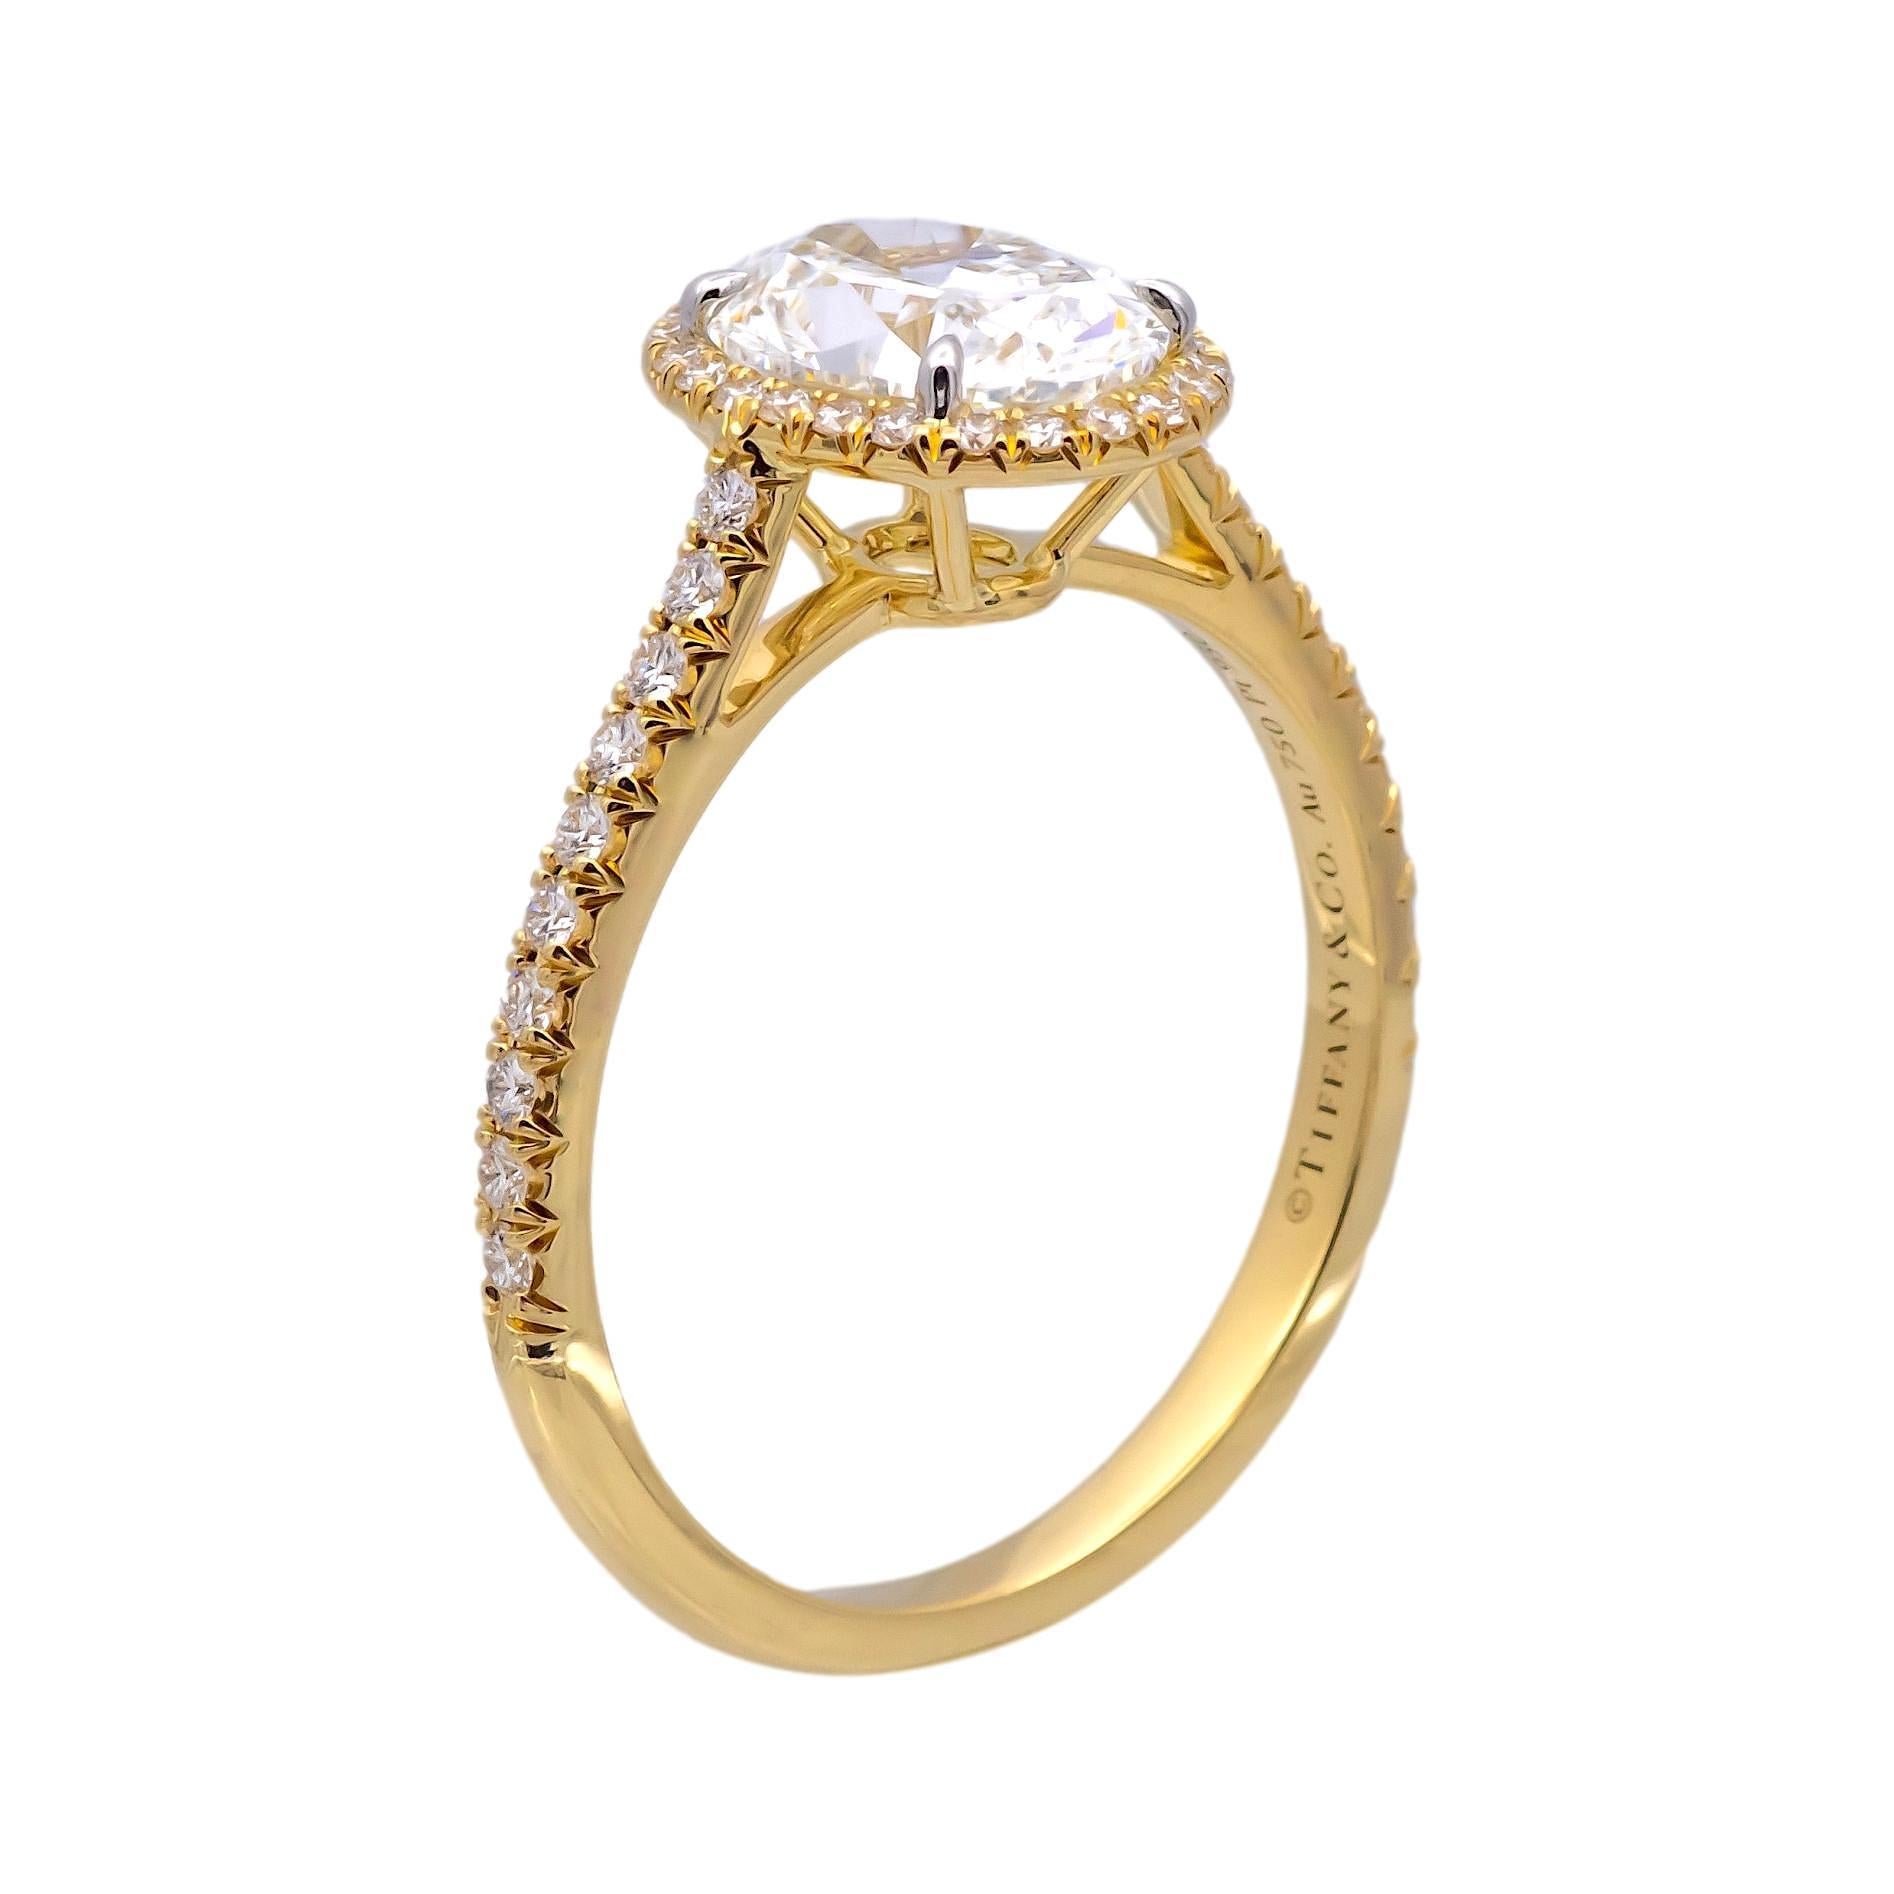 Tiffany & Co. Soleste Diamond Engagement ring featuring a 1.72 ct Oval Shape diamond center graded bright F color and fine VS1 clarity. The center diamond is finely crafted in 18K Yellow Gold with platinum prongs accented by a bead set diamond halo